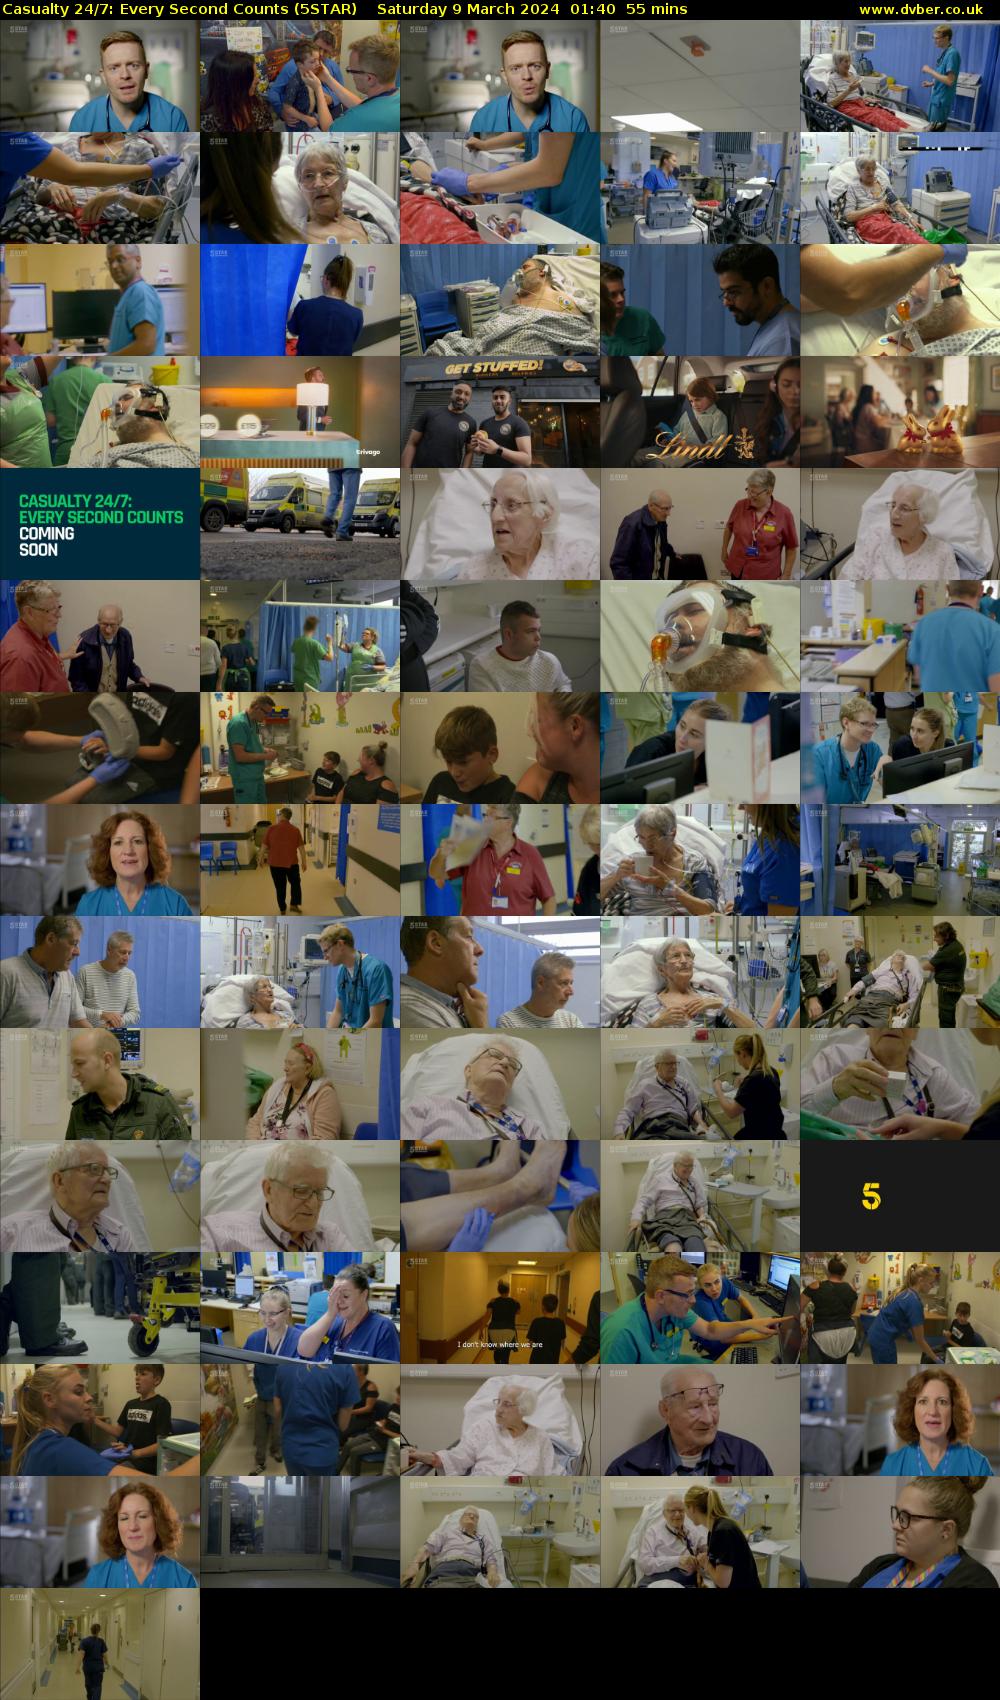 Casualty 24/7: Every Second Counts (5STAR) Saturday 9 March 2024 01:40 - 02:35